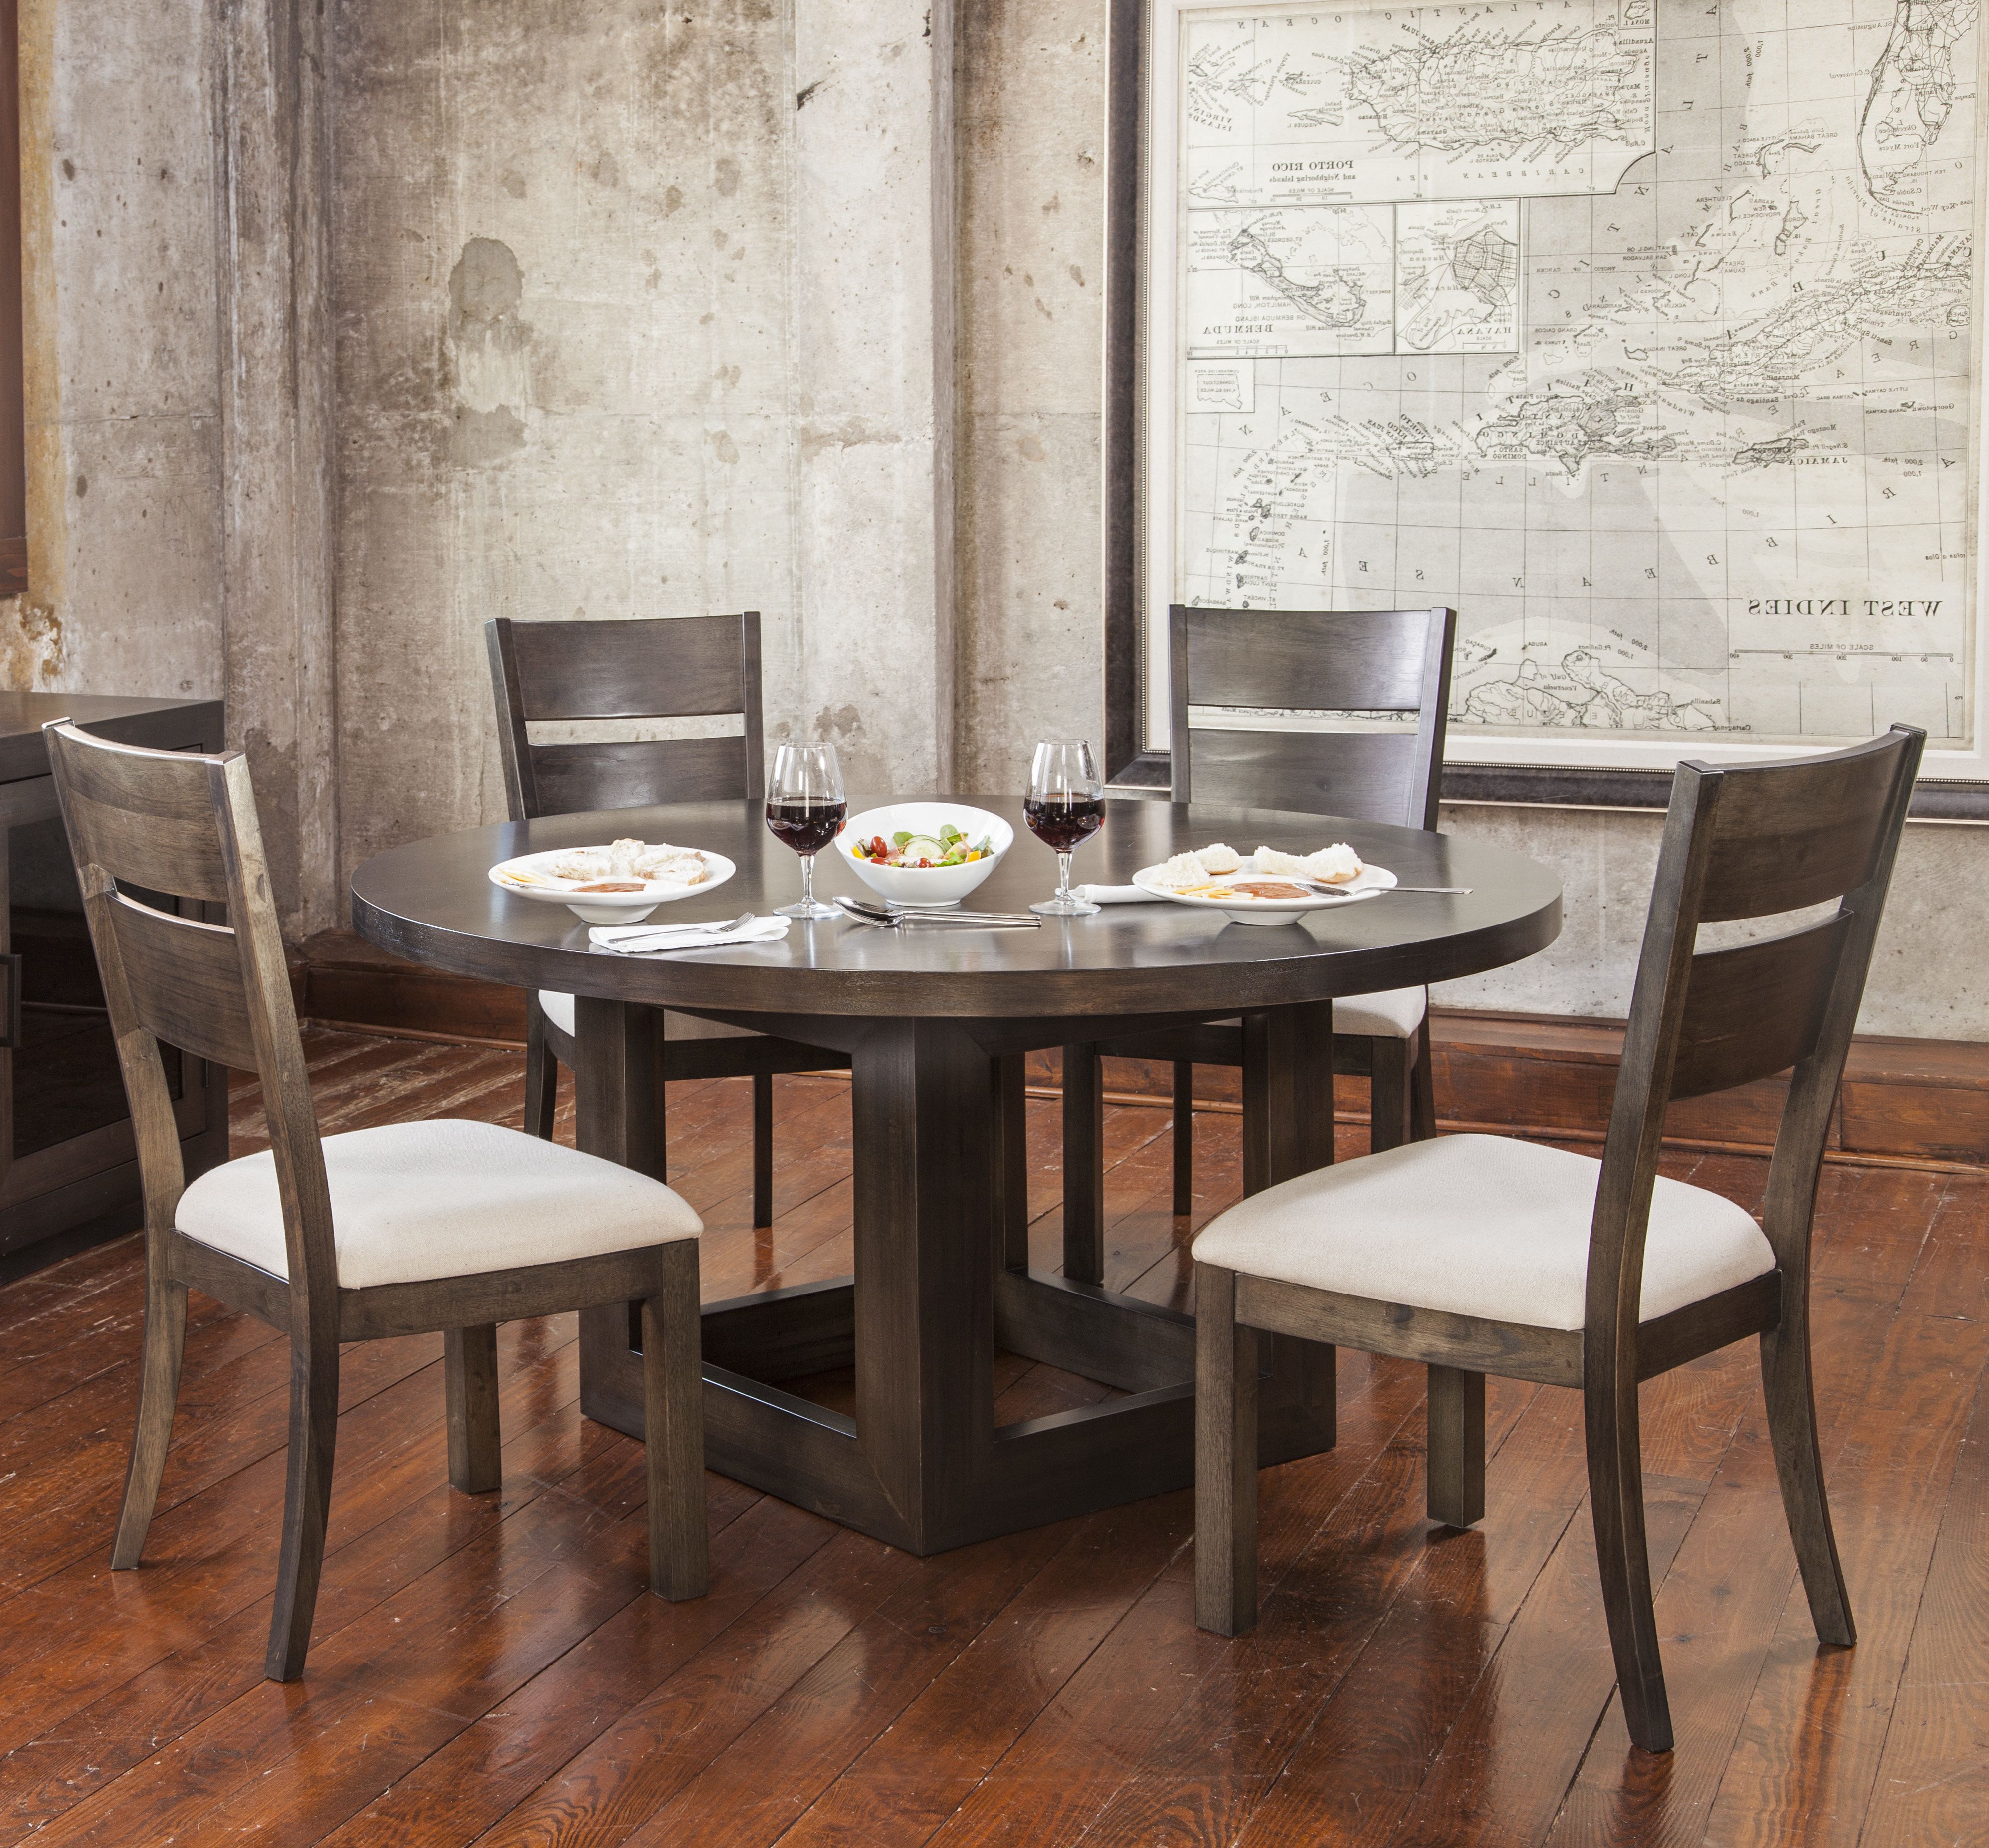 Goodman 5 Piece Solid Wood Dining Sets (set Of 5) Intended For Best And Newest Gracie Oaks Hazelton 5 Piece Solid Wood Dining Set (View 22 of 25)